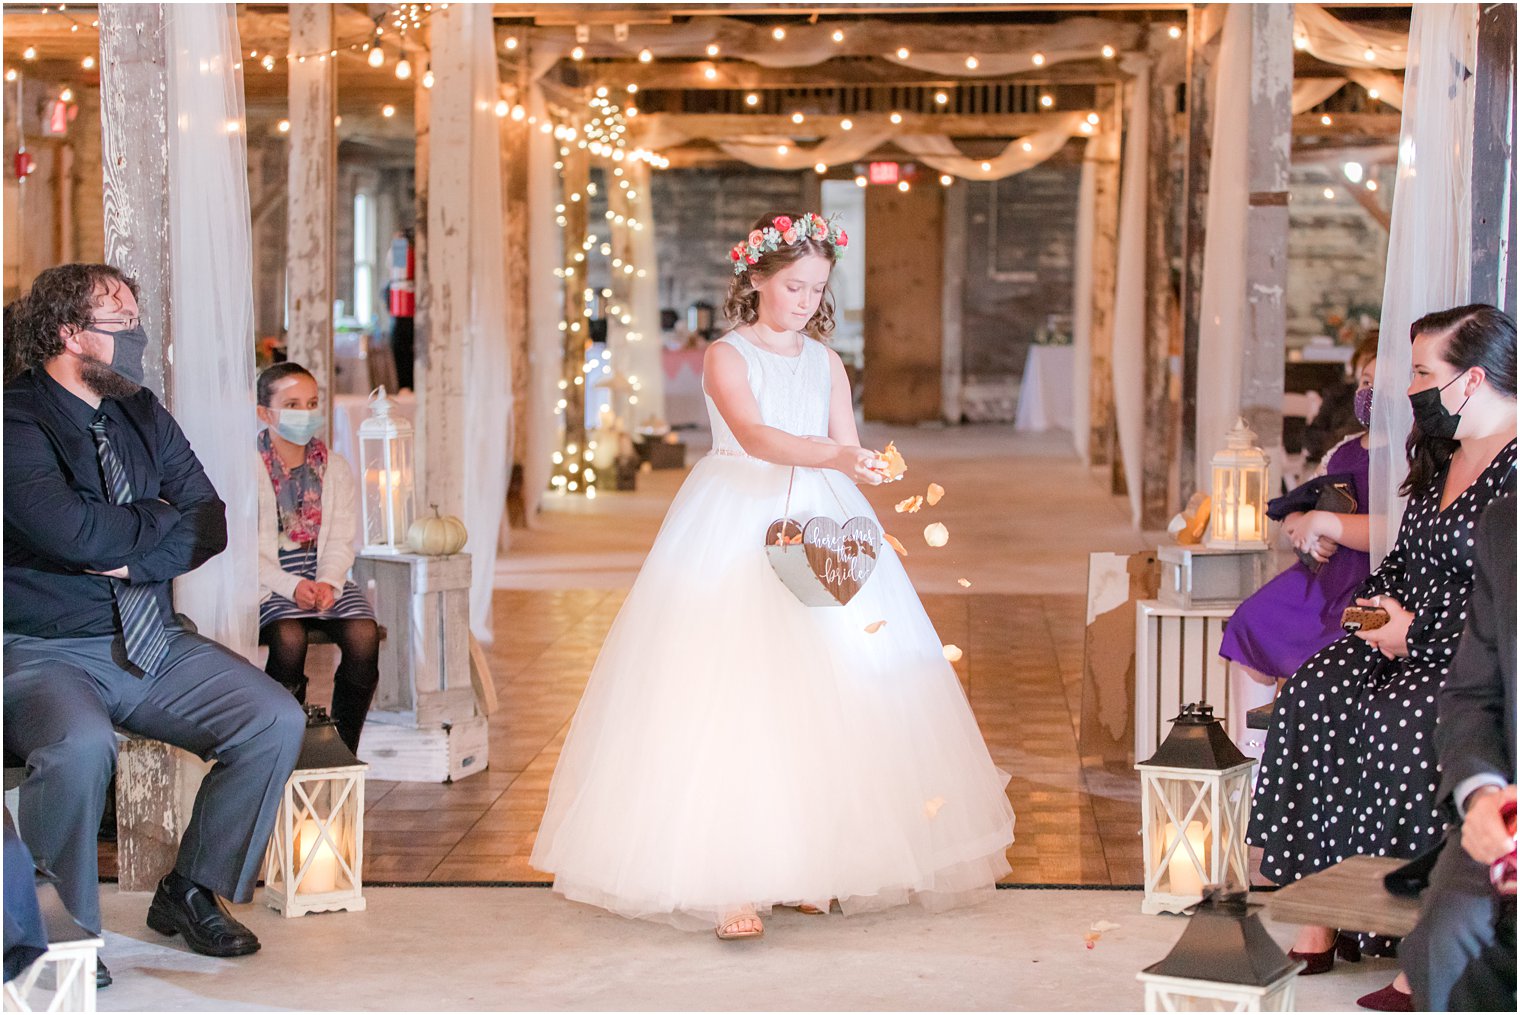 bride's daughter walks down the aisle with flower petals